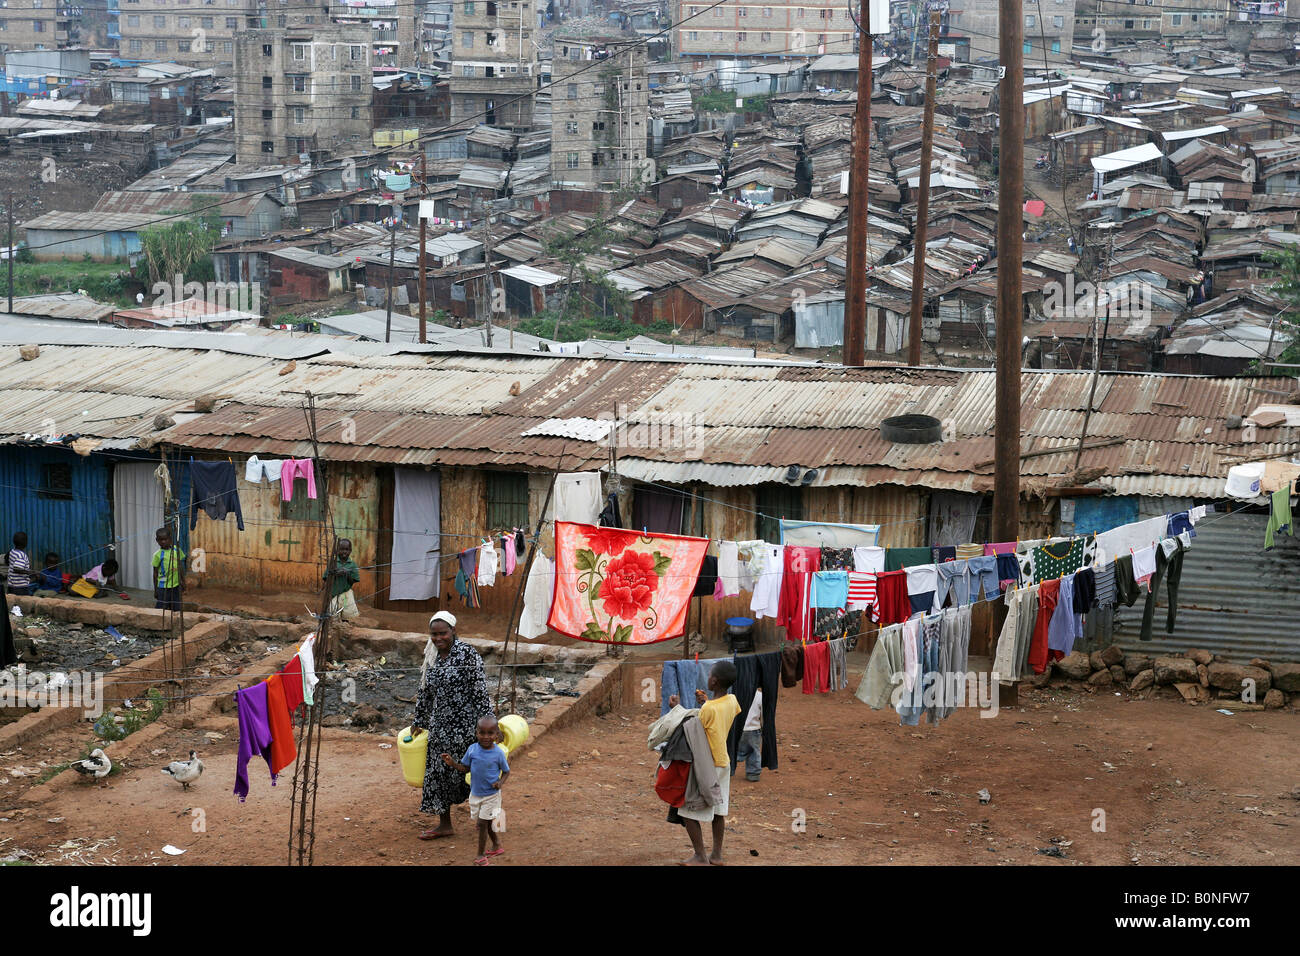 Mathare Valley, one of the most notorious slums in Nairobi, Kenya, Africa. Stock Photo